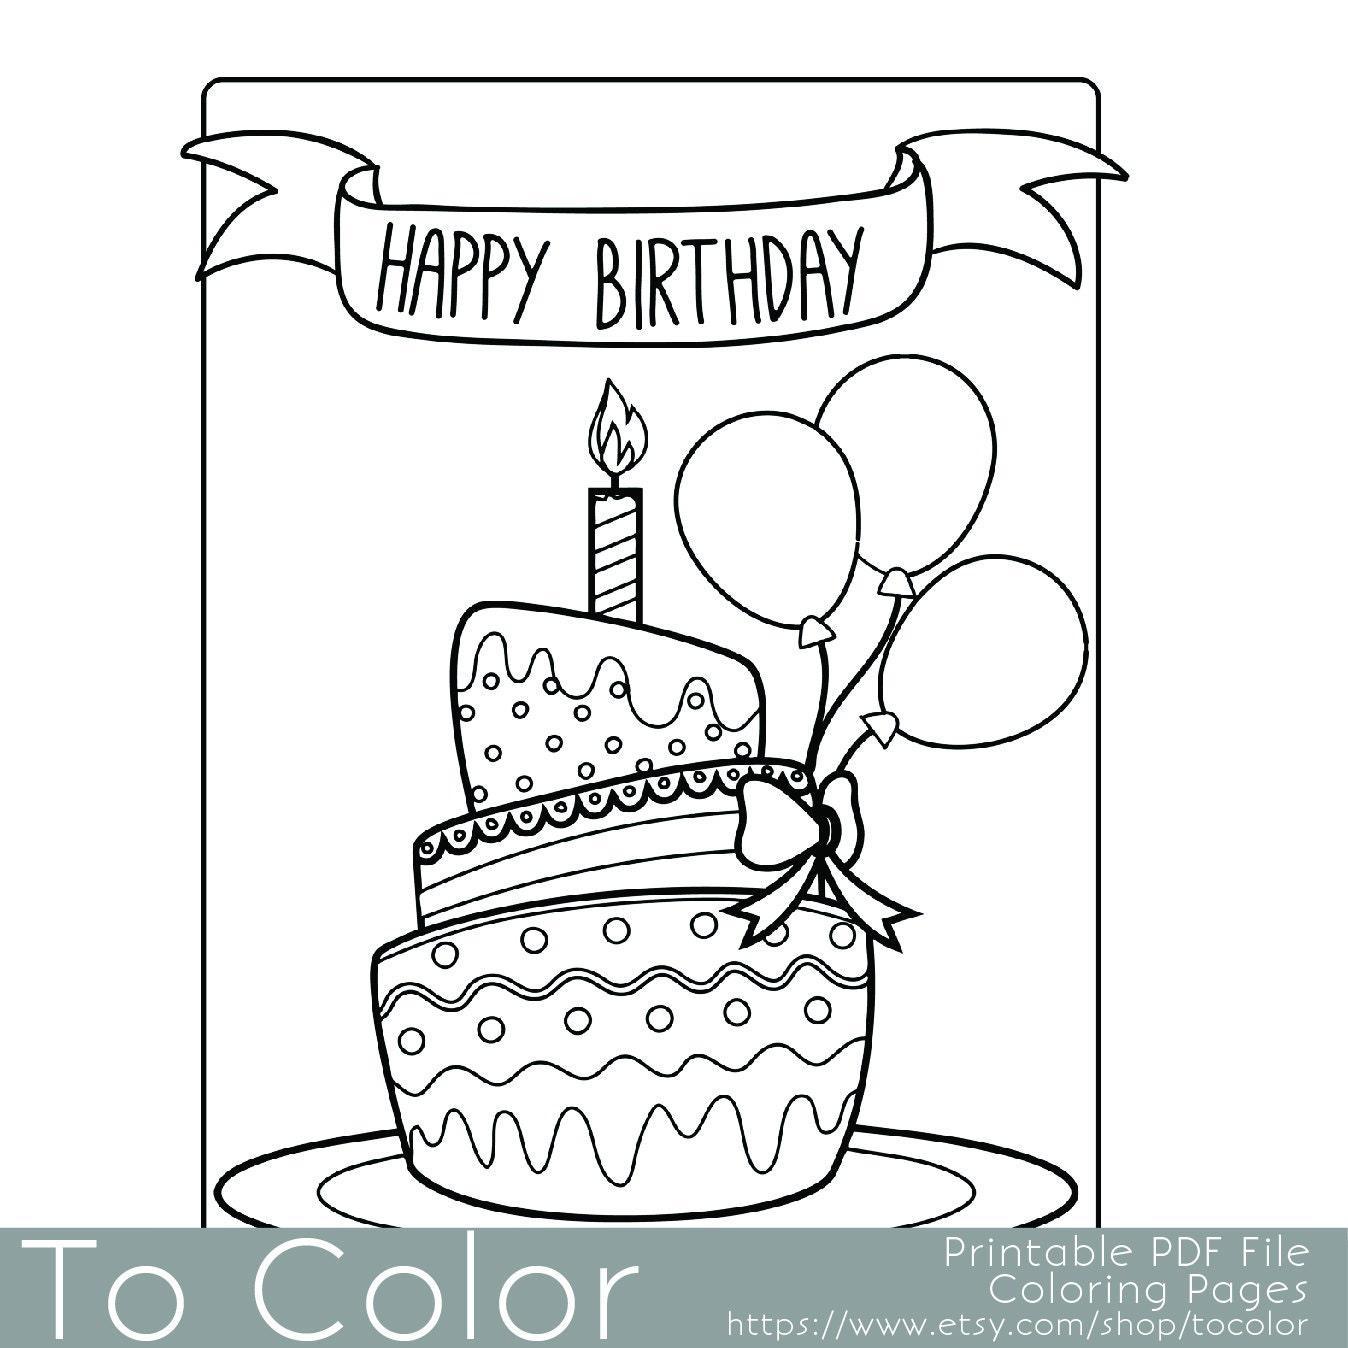 Download Printable Birthday Coloring Page for Adults PDF / JPG